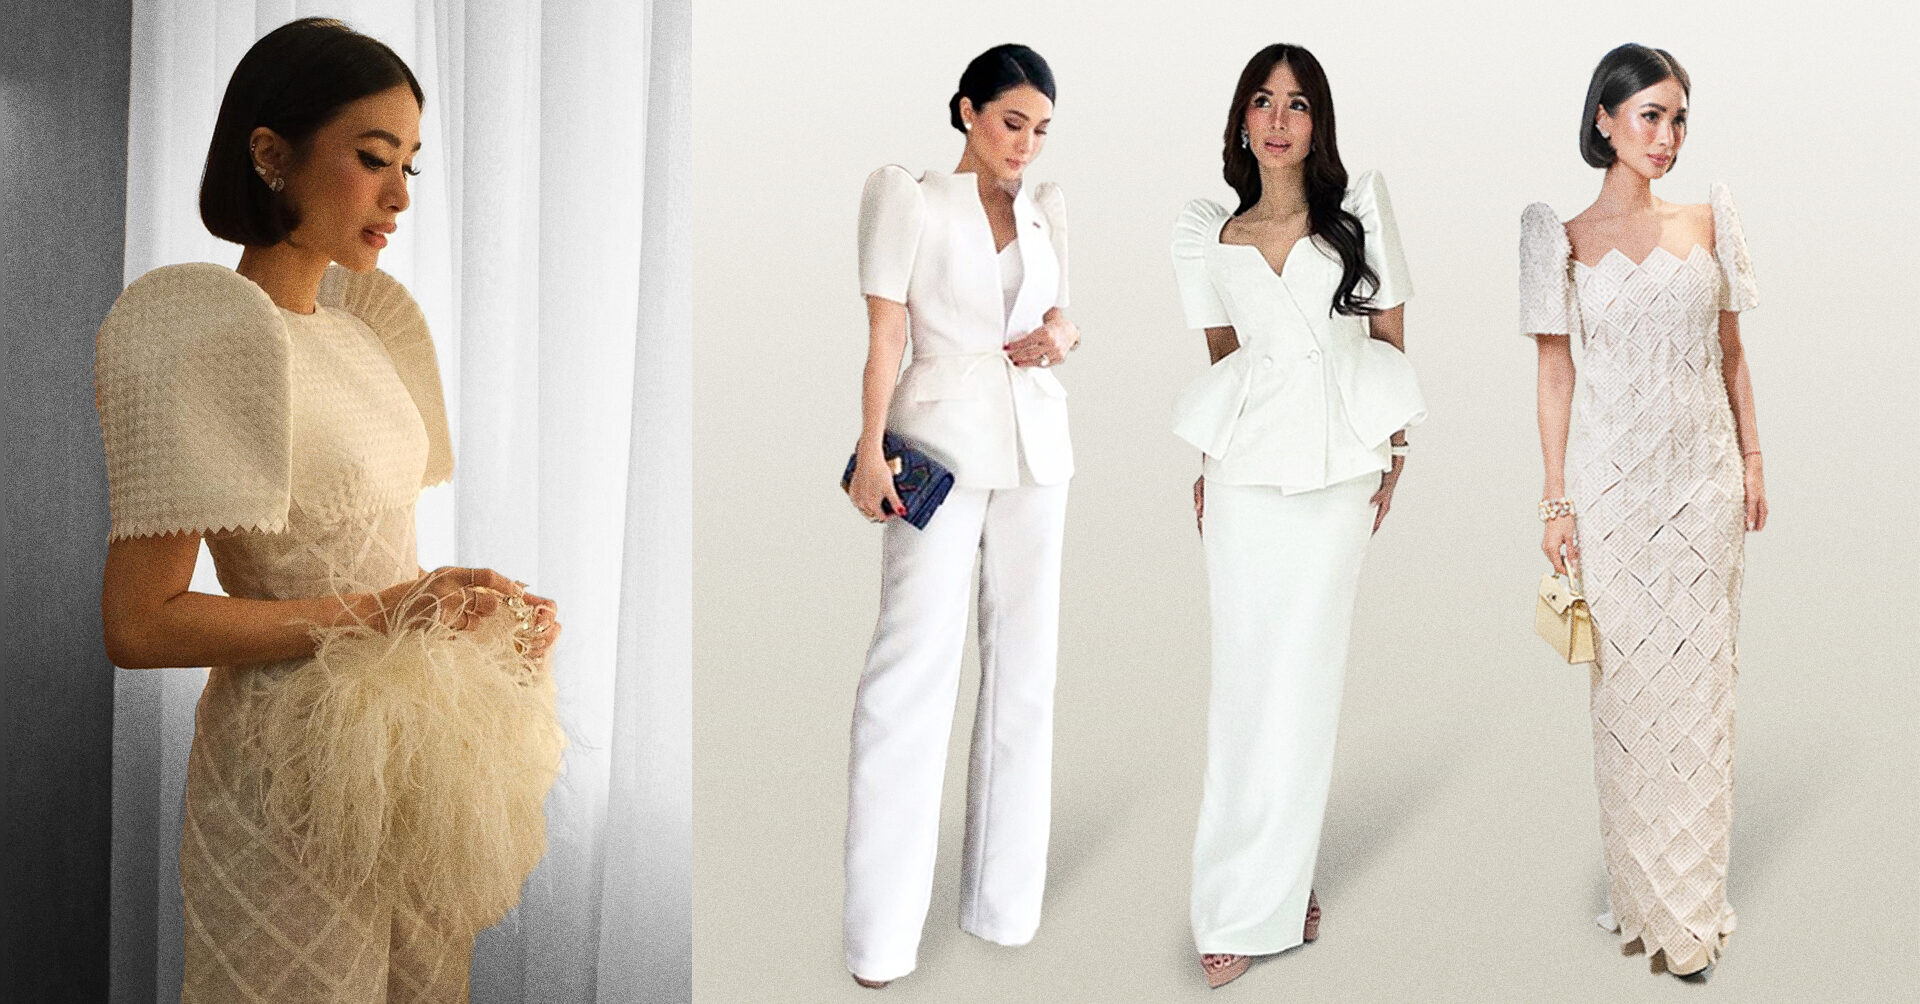 SONA look back: A decade of Heart Evangelista’s iconic white outfits